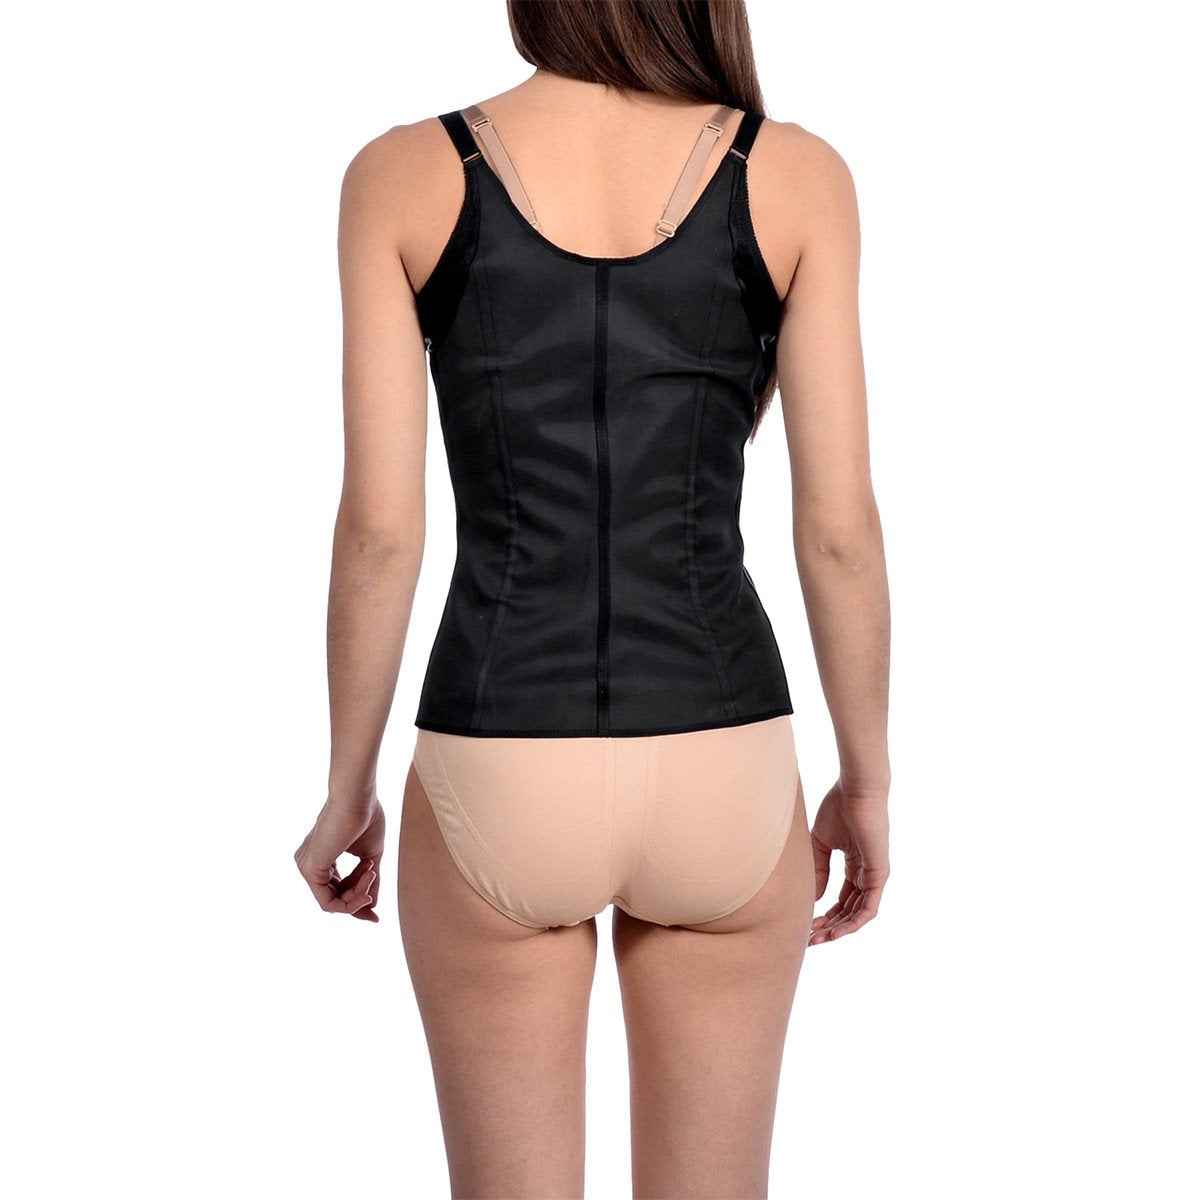 Latex Waist Shaper and Trainer With Shoulder Straps